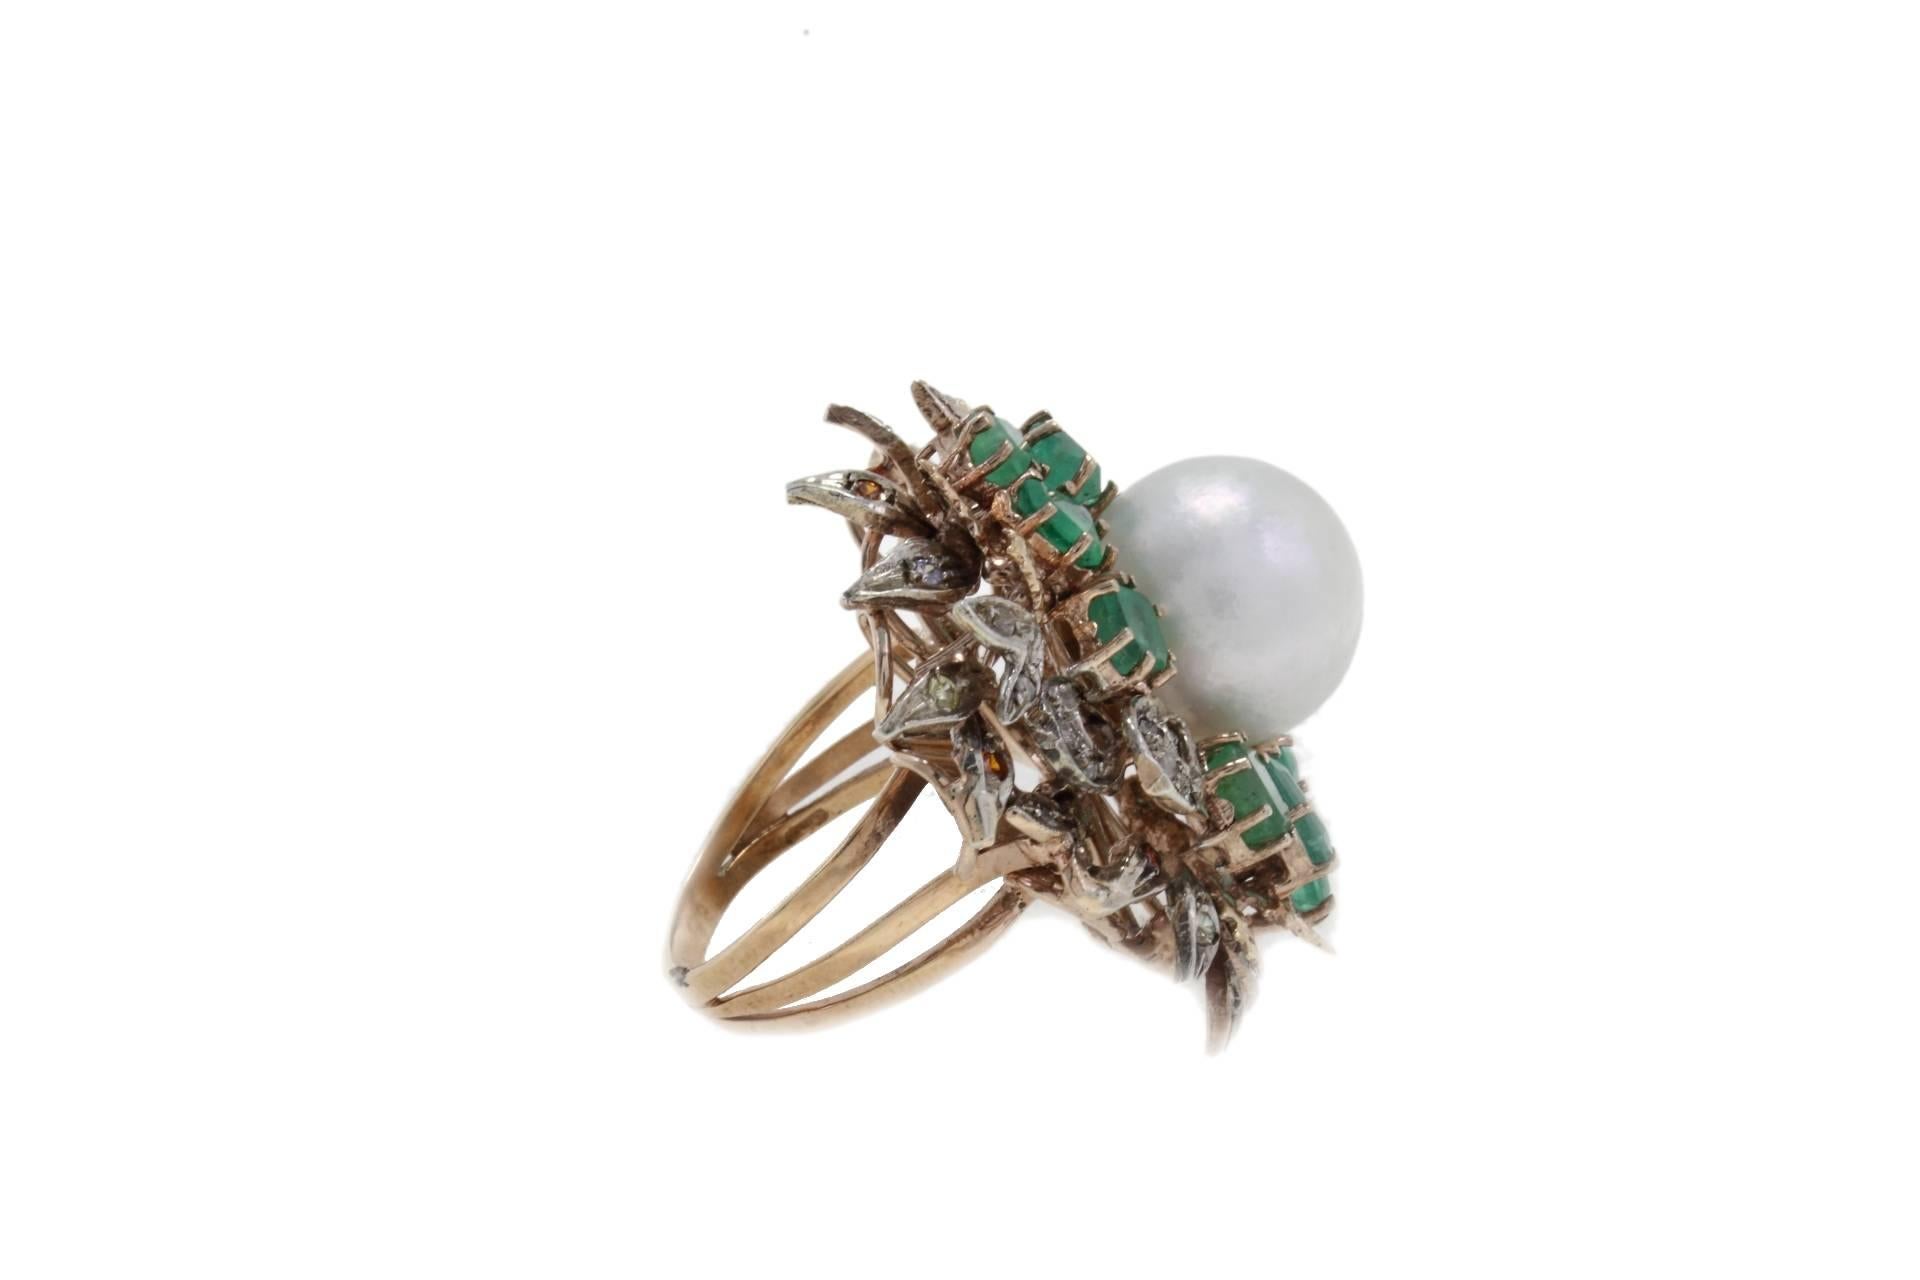 Cluster Ring in 9k gold and silver composed of a pearl in the center surrounded by diamonds, colored stones and emeralds.
Diamonds 0.22 kt
Emeralds 3.29 kt
Colored Stones 0.09 kt
Pearl 3.10 gr
Tot.Weight 14.10 gr
R.F gfhf

For any enquires, please